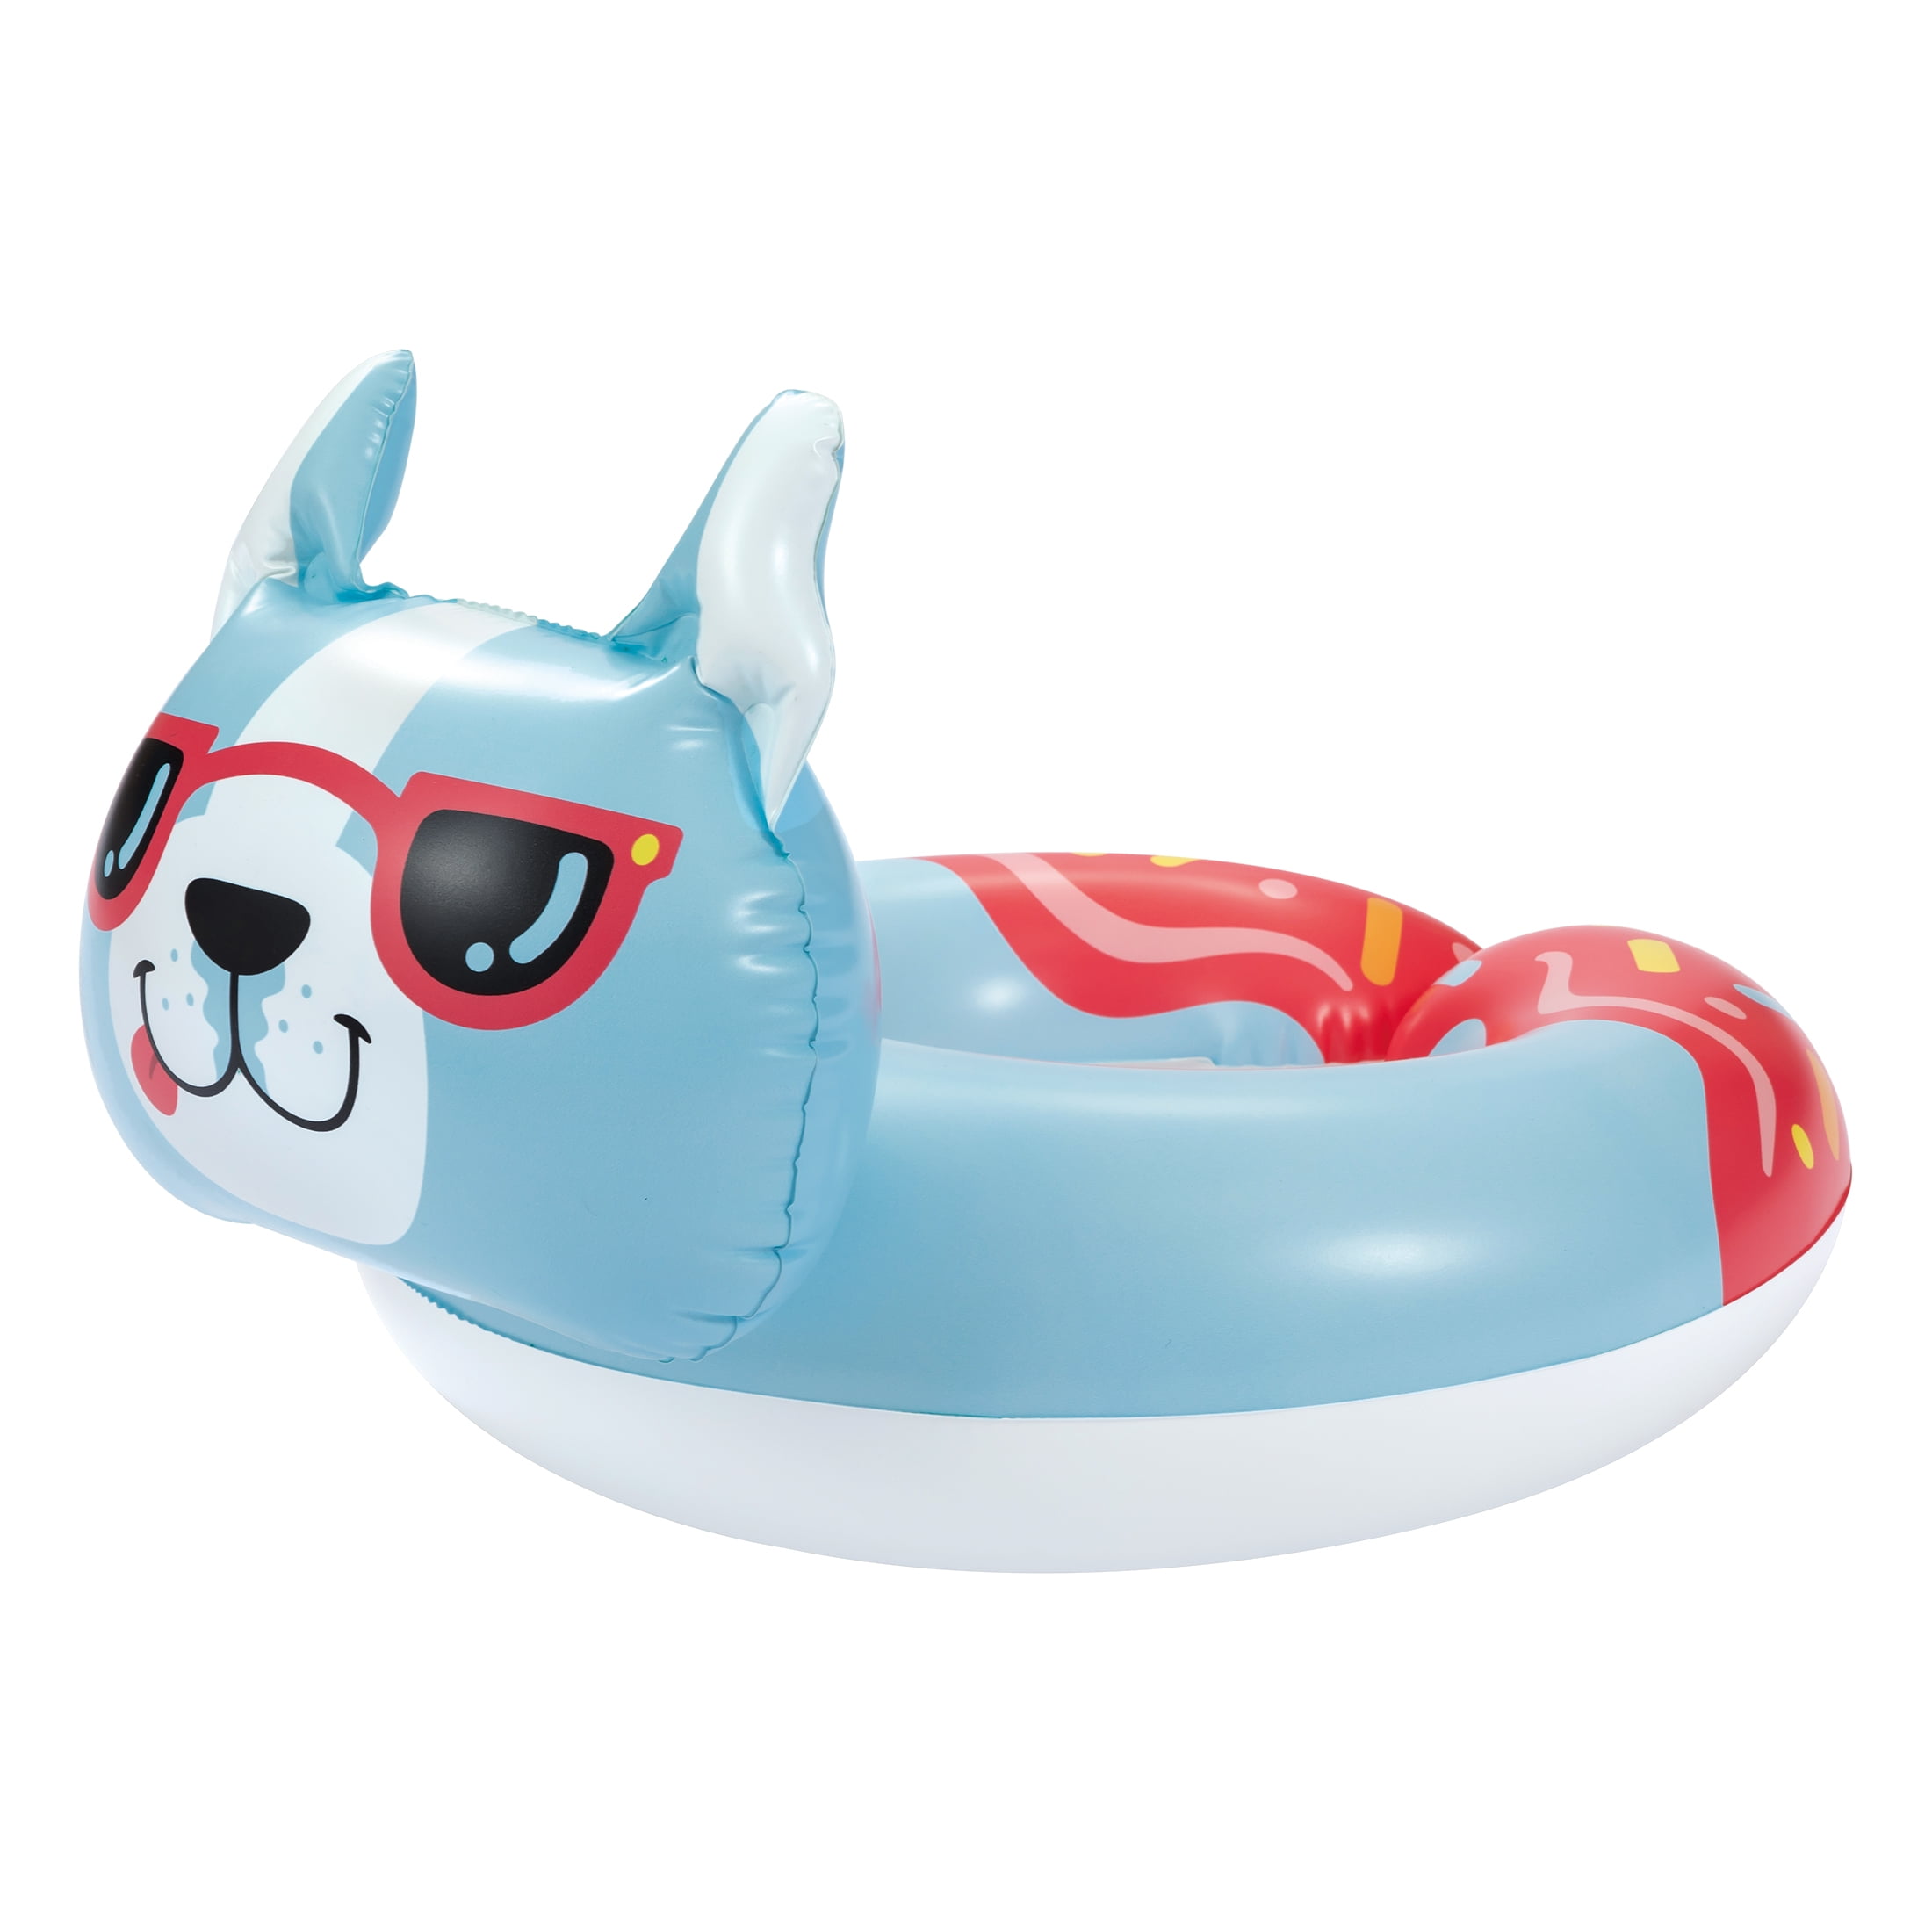 Bluescape Blue Donut Dog Split Inflatable Swim Ring for Kids, Ages 3 to 6, Unisex